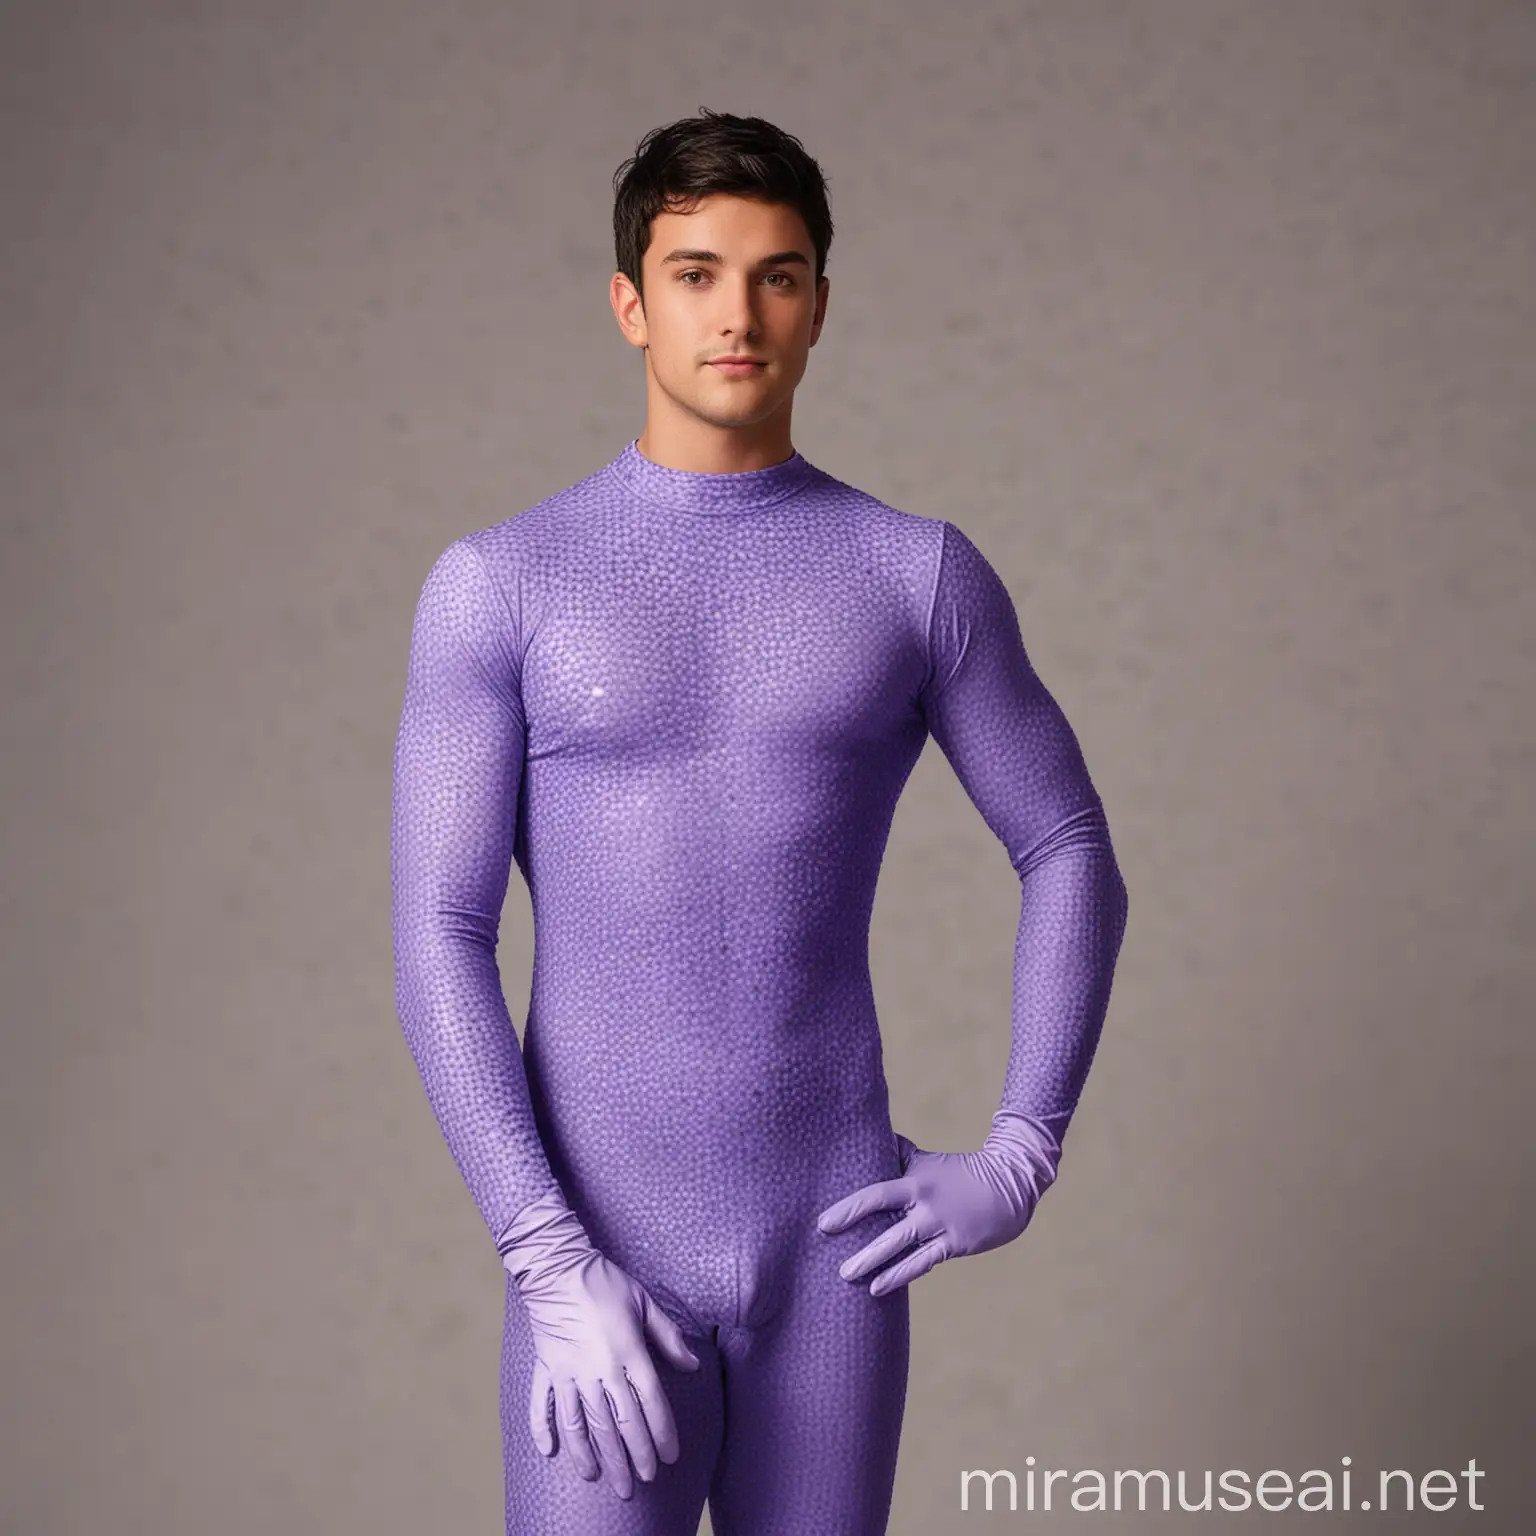 Handsome 27 year old American man, with short black hair; hazel eyes, pointed nose; wearing bright periwinkle hero spandex bodysuit and gloves with little honeycomb pattern; rear view.